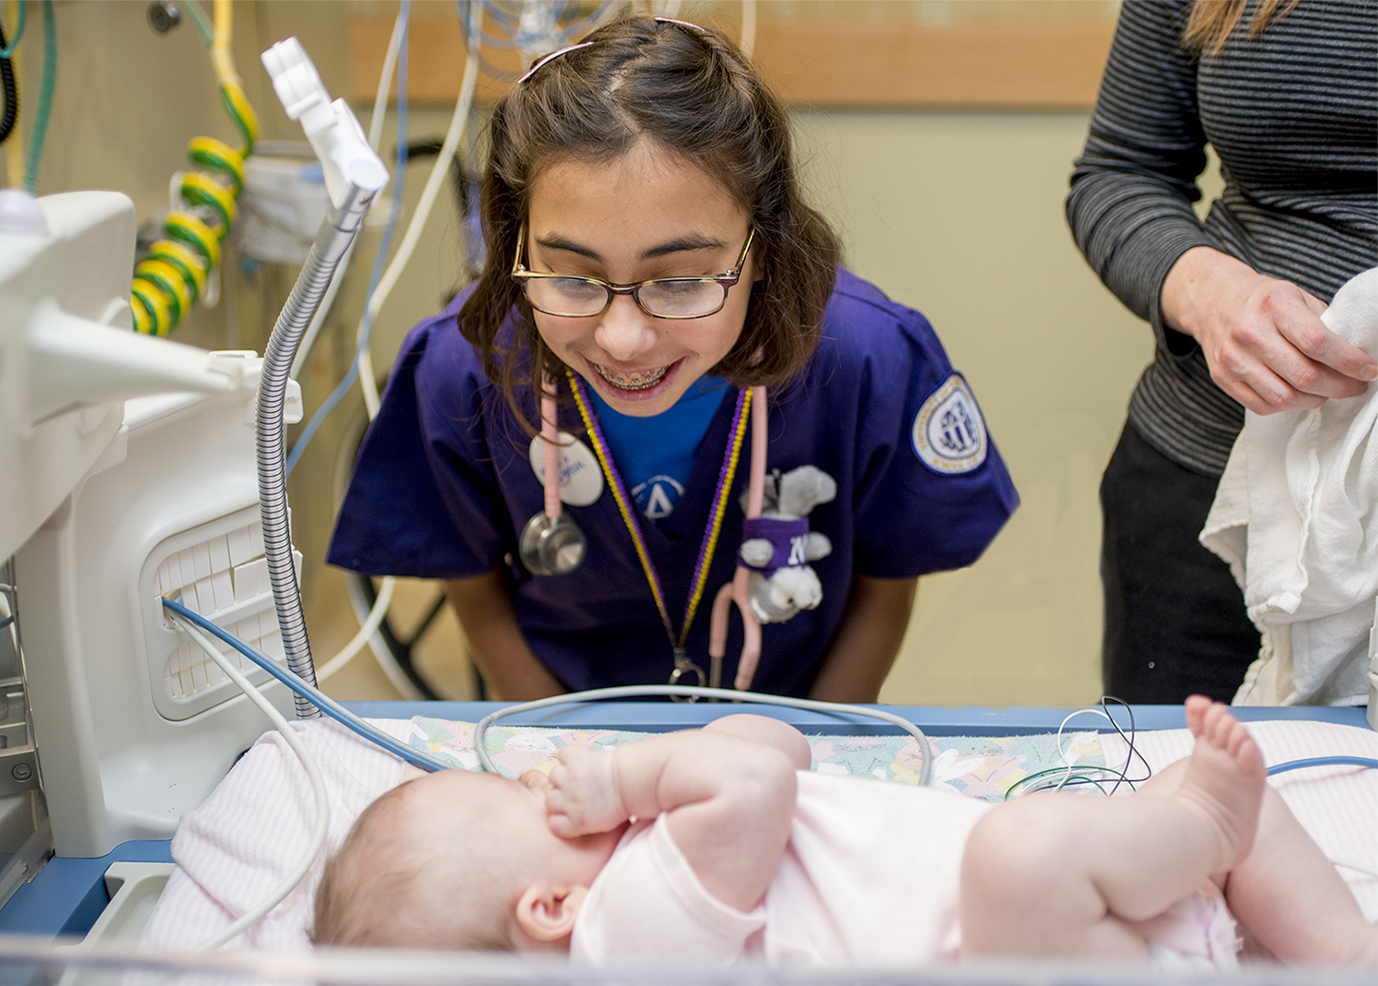 The Make-A-Wish Foundation granted Samantha's wish to be a nurse for a day with help from UW Medicine